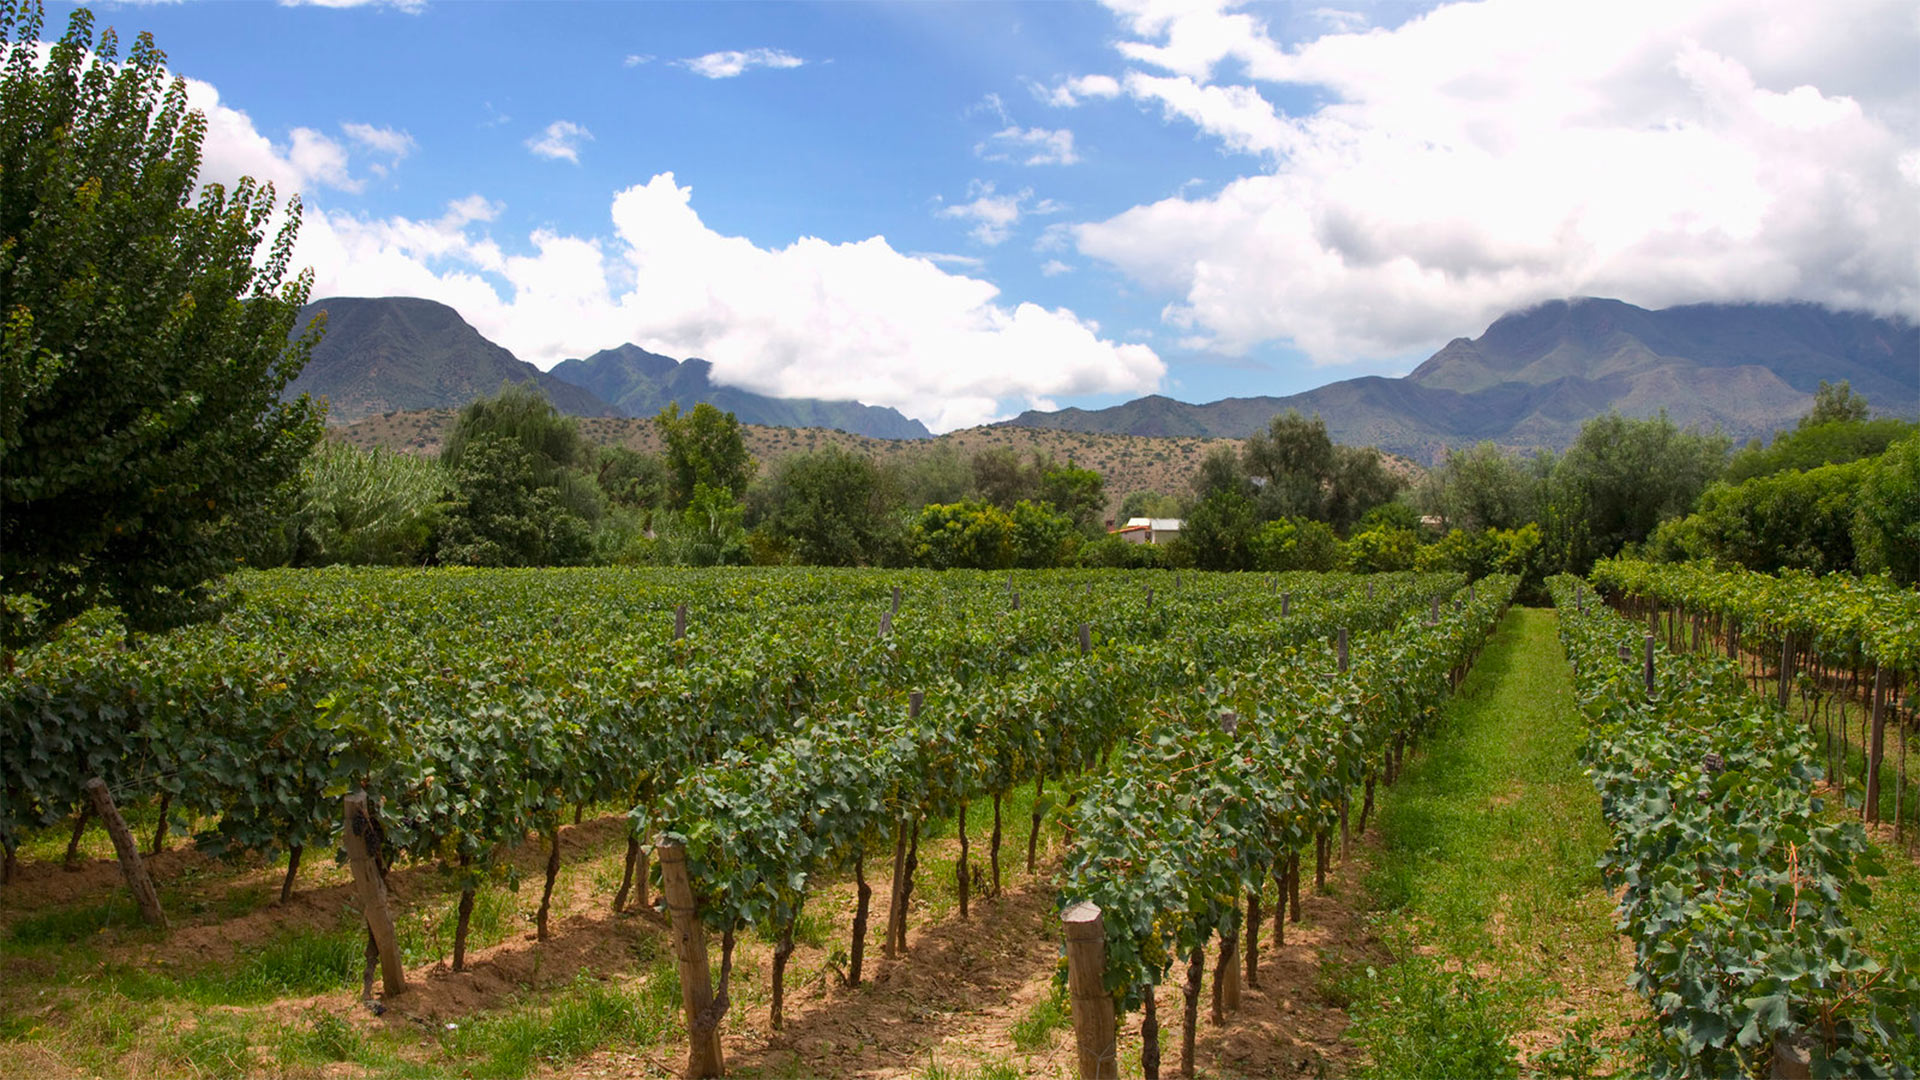 A vineyard in Tarija, Bolivia, the center of the country's wine industry. A growing number of wineries here are improving their techniques, ramping up production and starting to export, as global interest in Bolivia's award-winning wines grows.